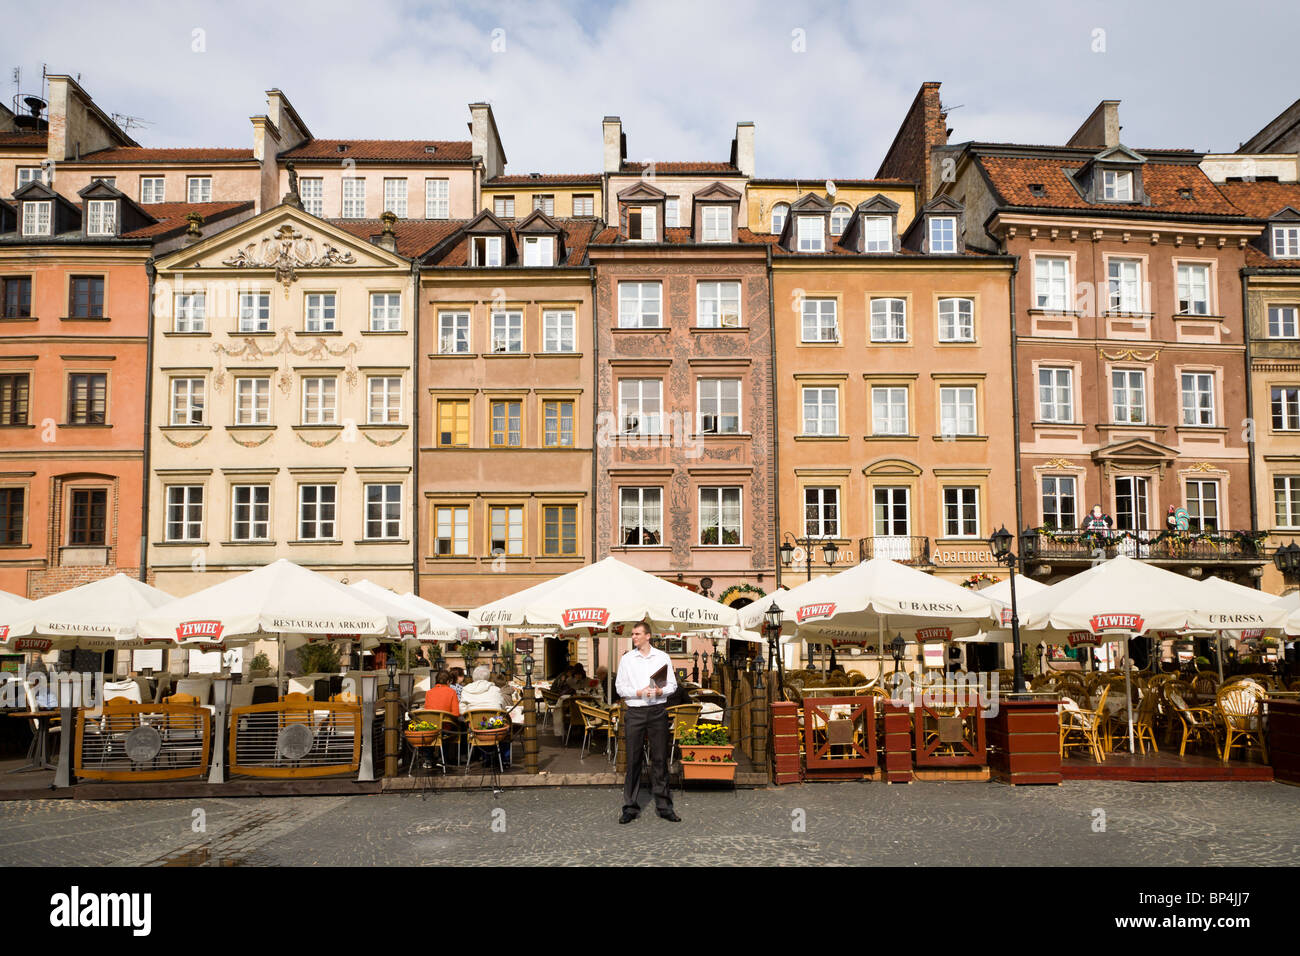 Restaurants on Old Town Market Place, Warsaw Poland. Stock Photo